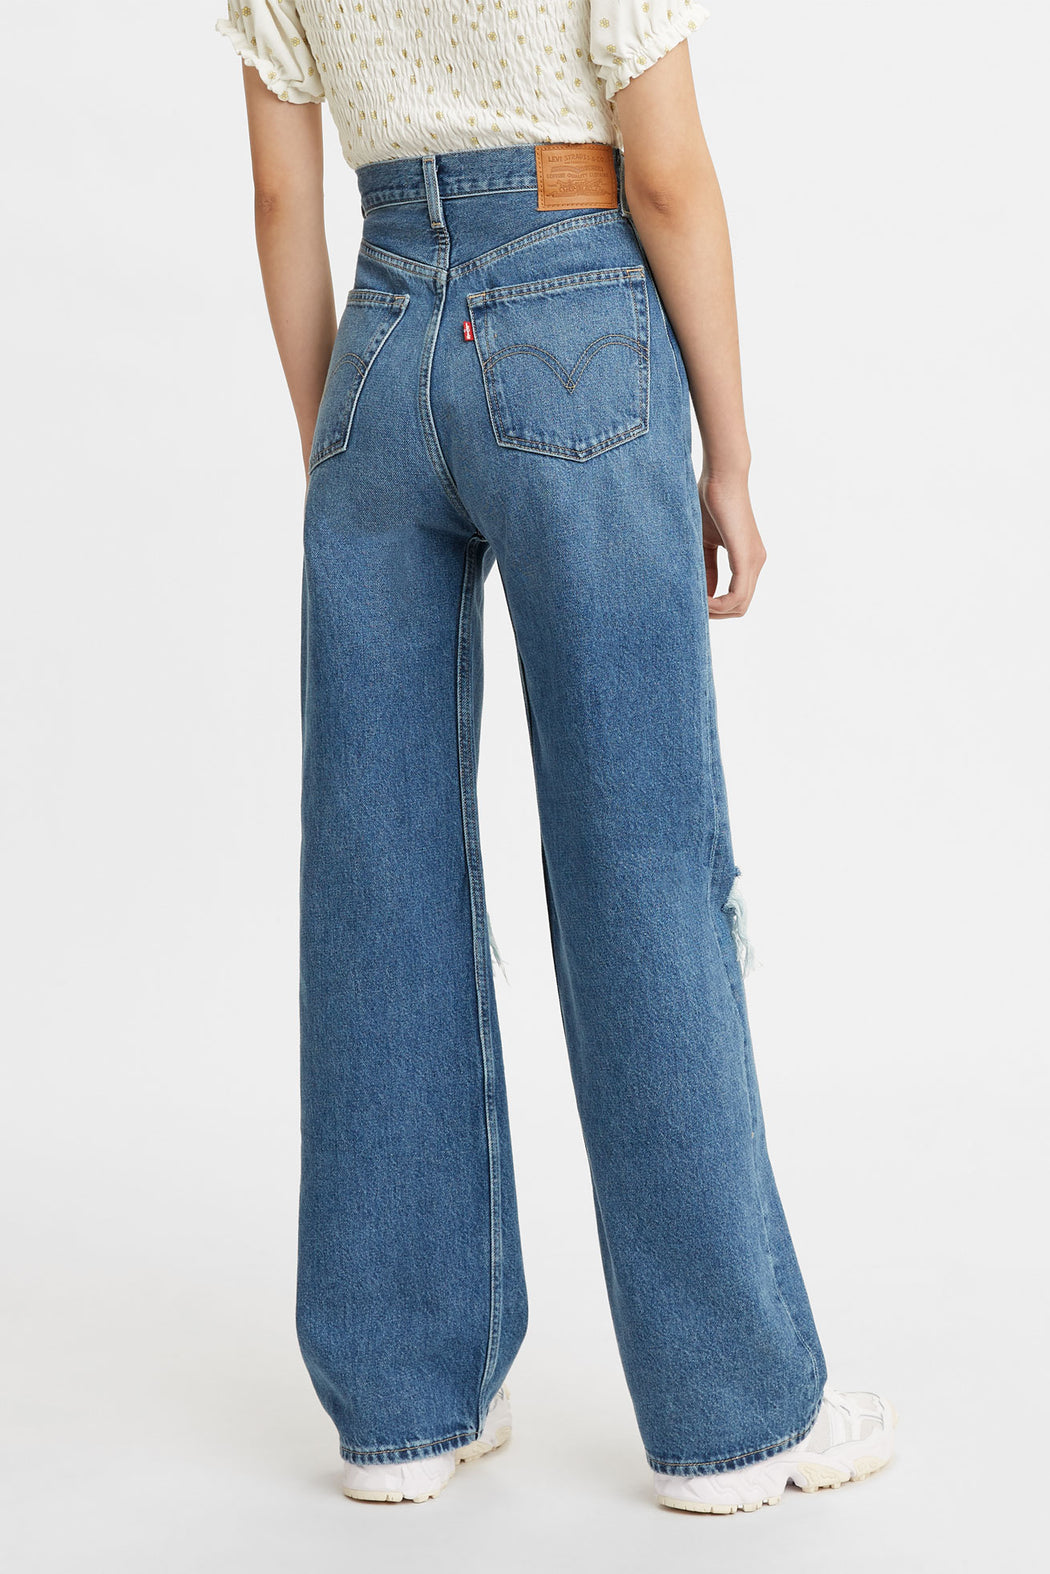 Levis-High-Loose-Jeans-Max-Out